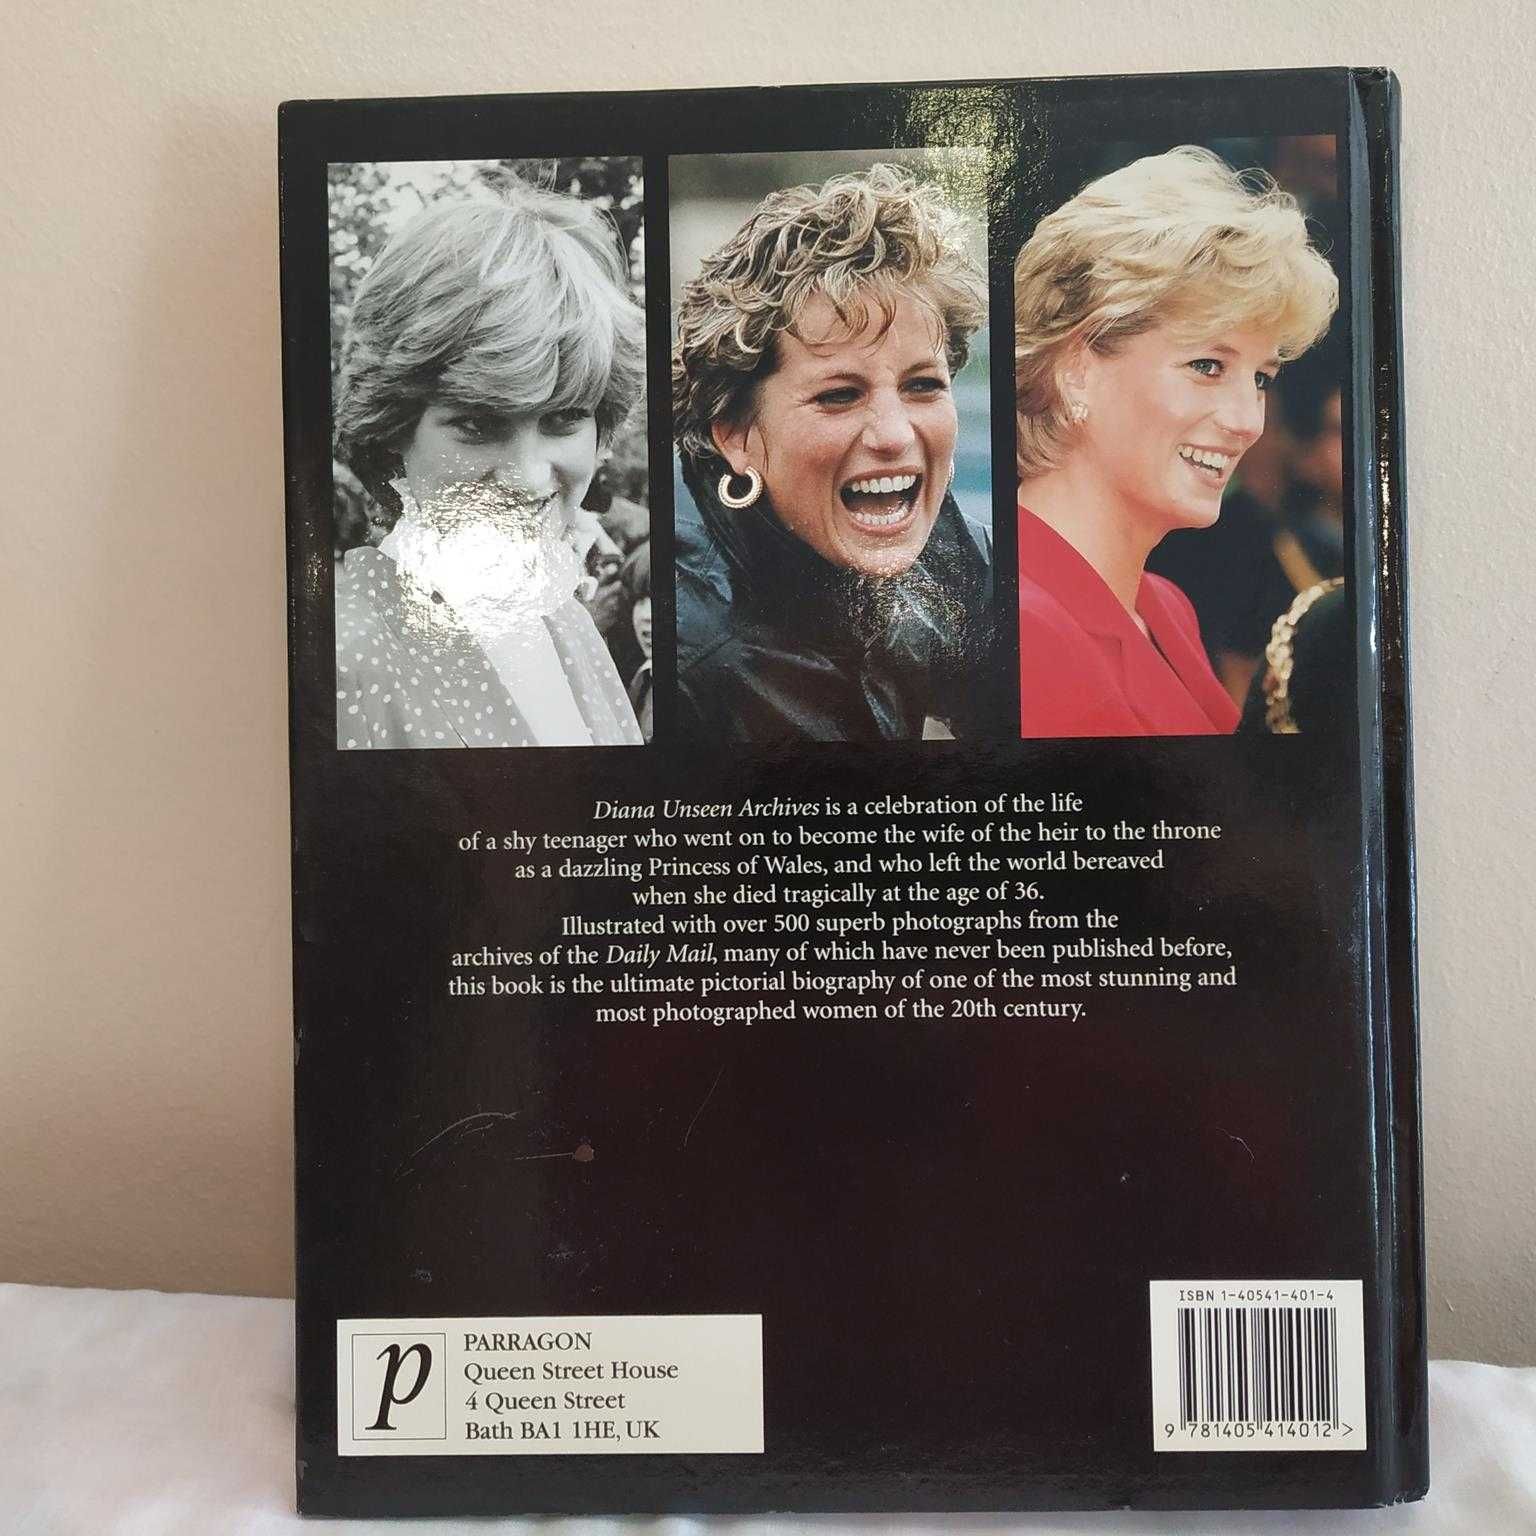 Unseen Archives, Diana by Alison Gauntlet